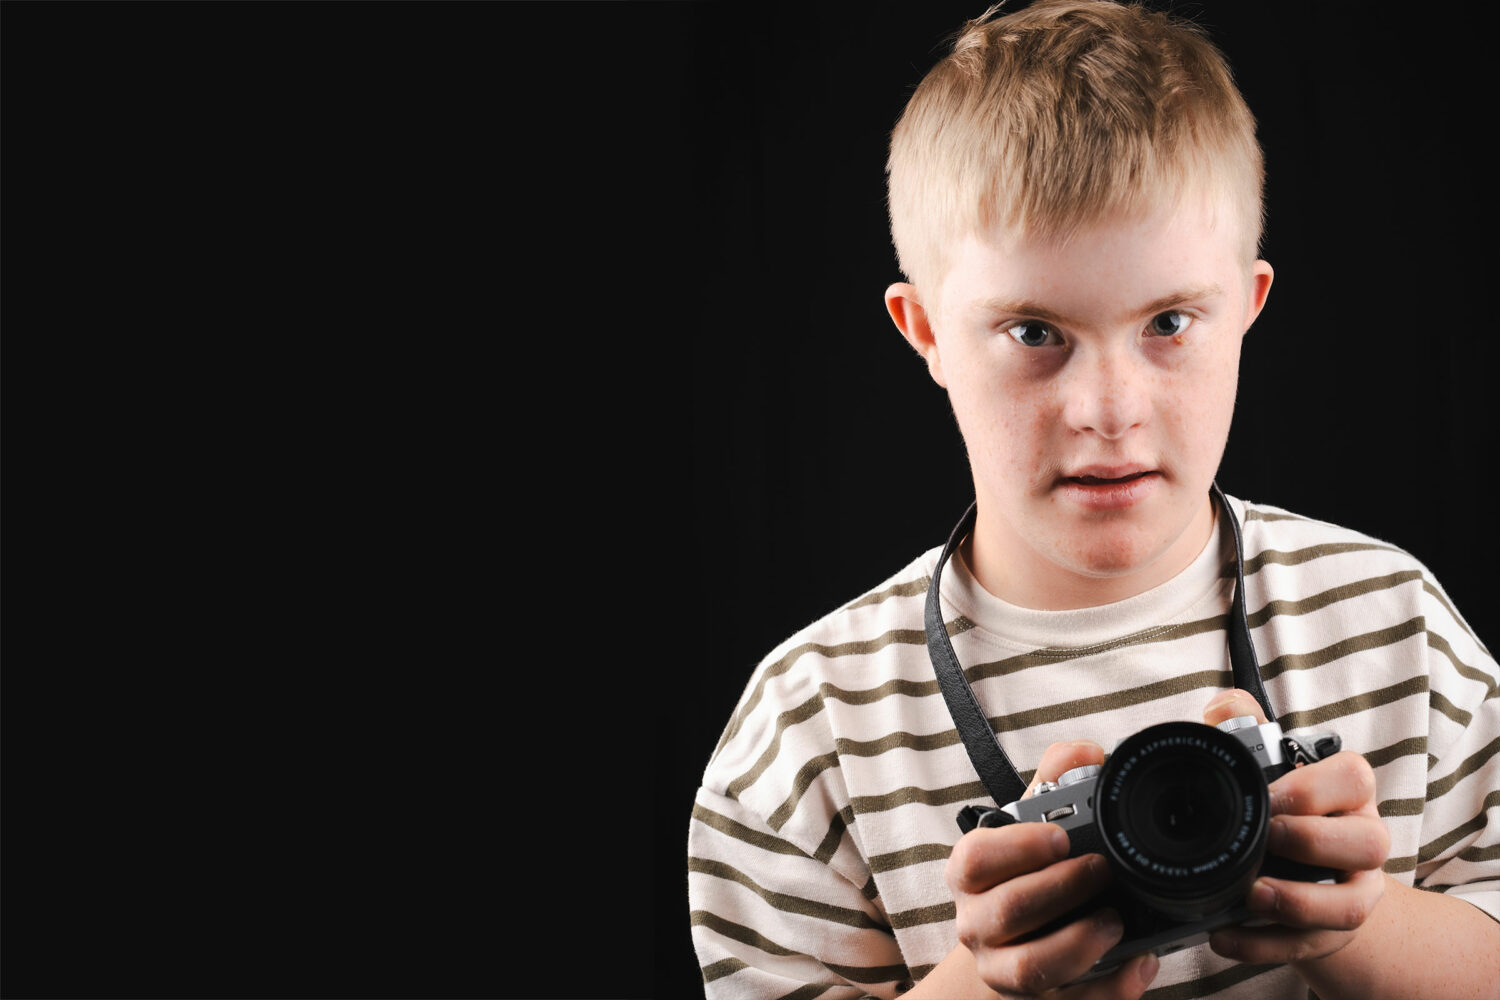 blonde teenage boy with Down syndrome wearing striped shirt with camera around his neck, on a black background